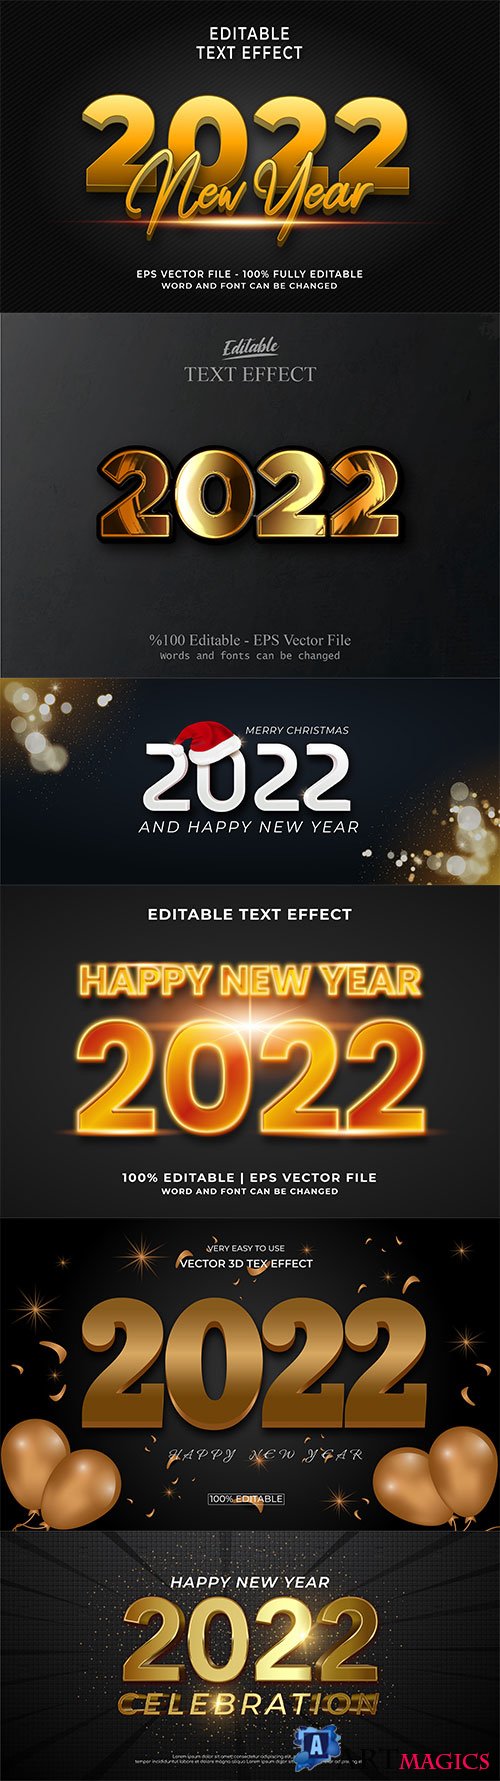 Merry christmas and happy new year 2022 editable vector text effects vol 2